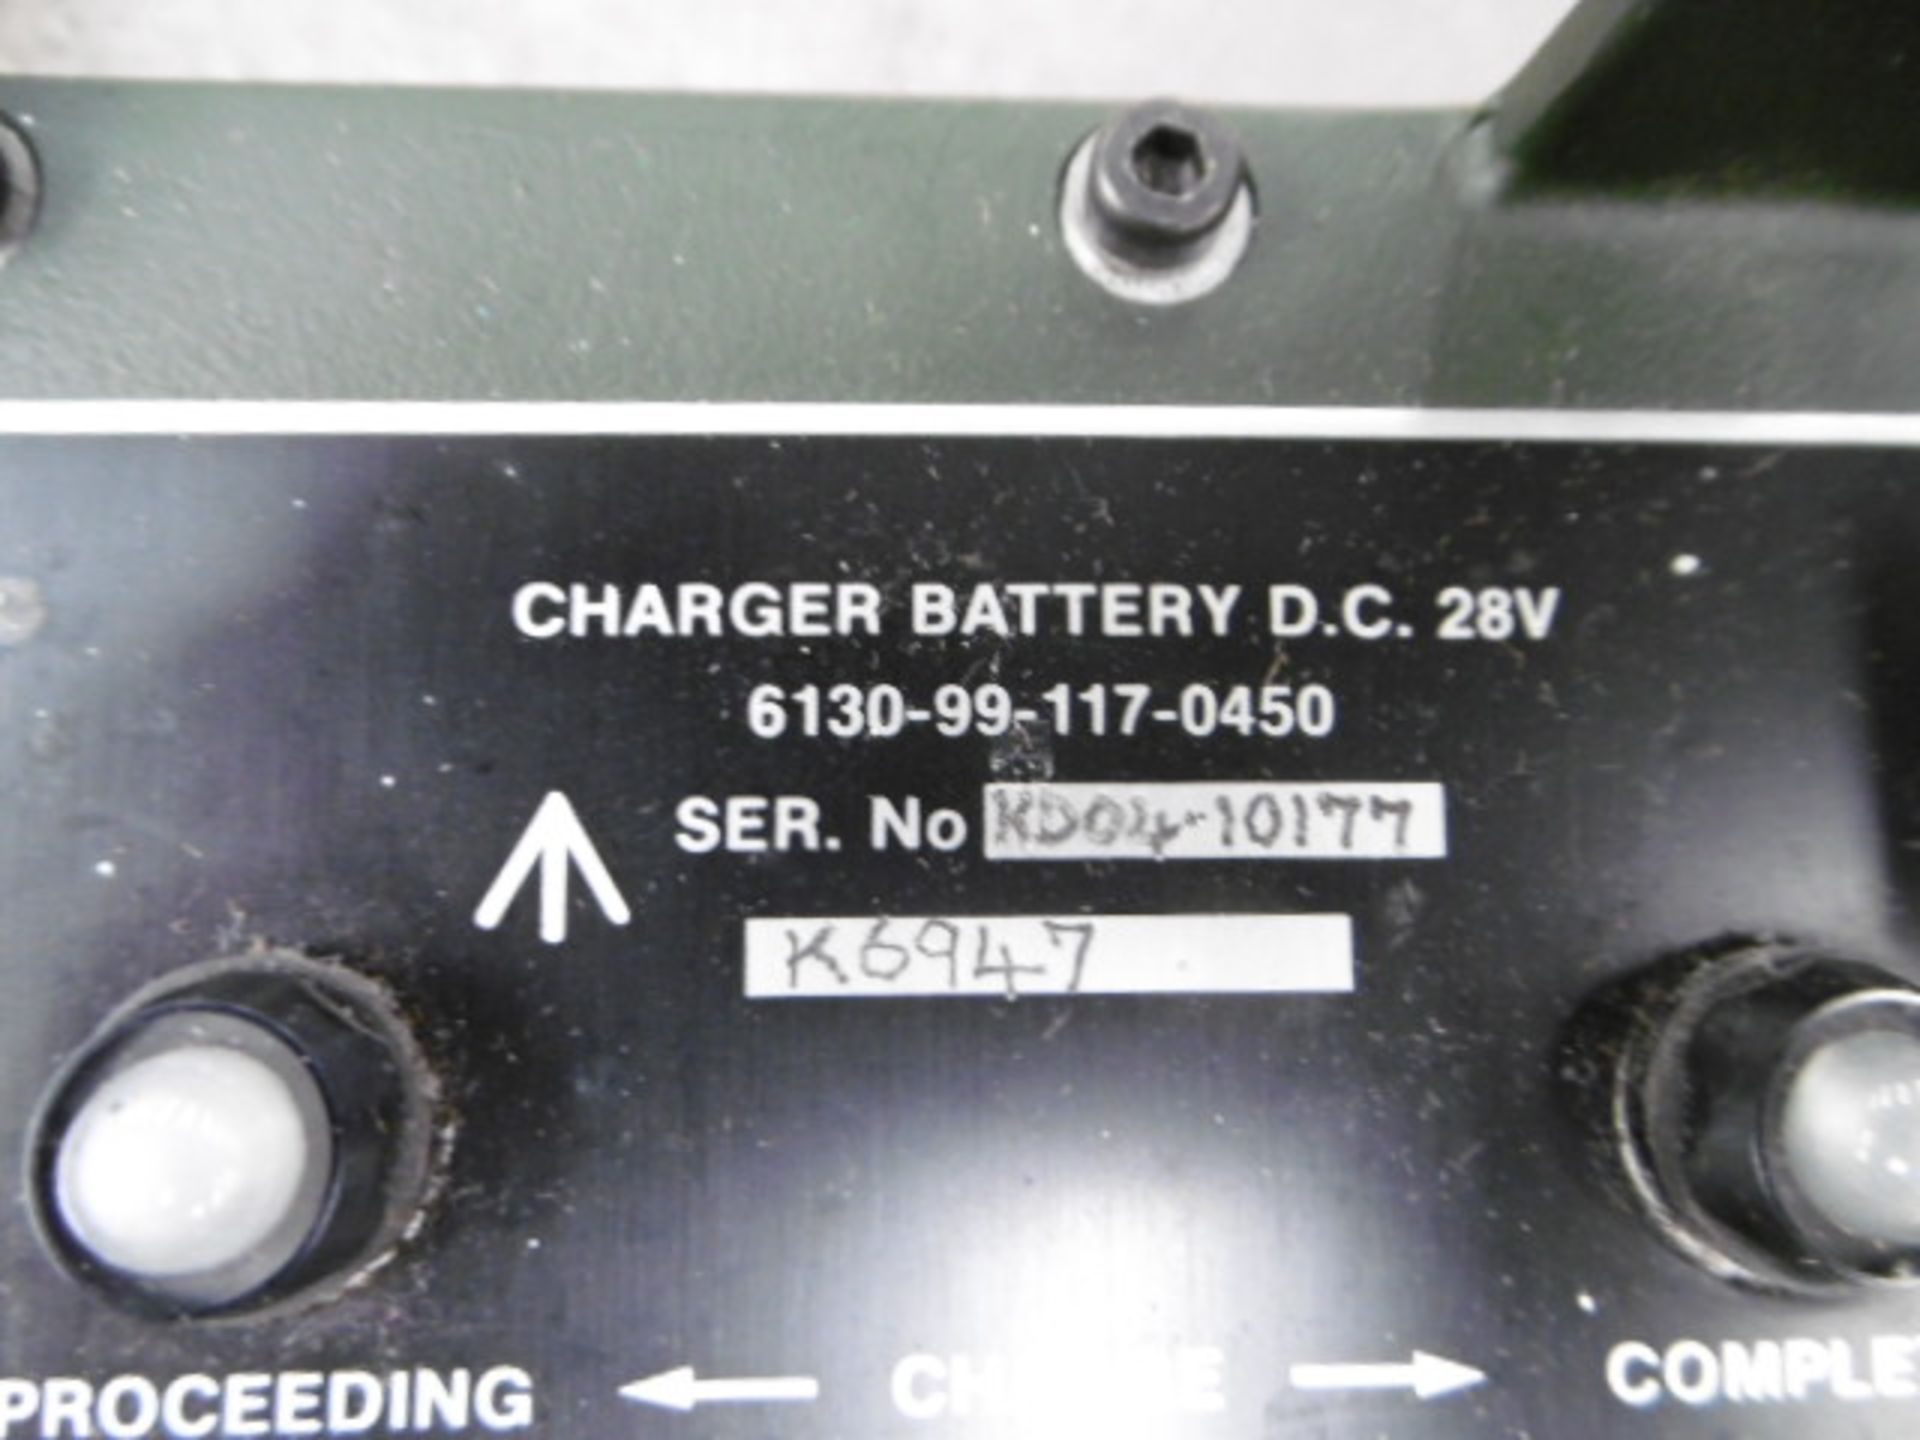 2 x Clansman D.C. 28V Battery Chargers - Image 3 of 4